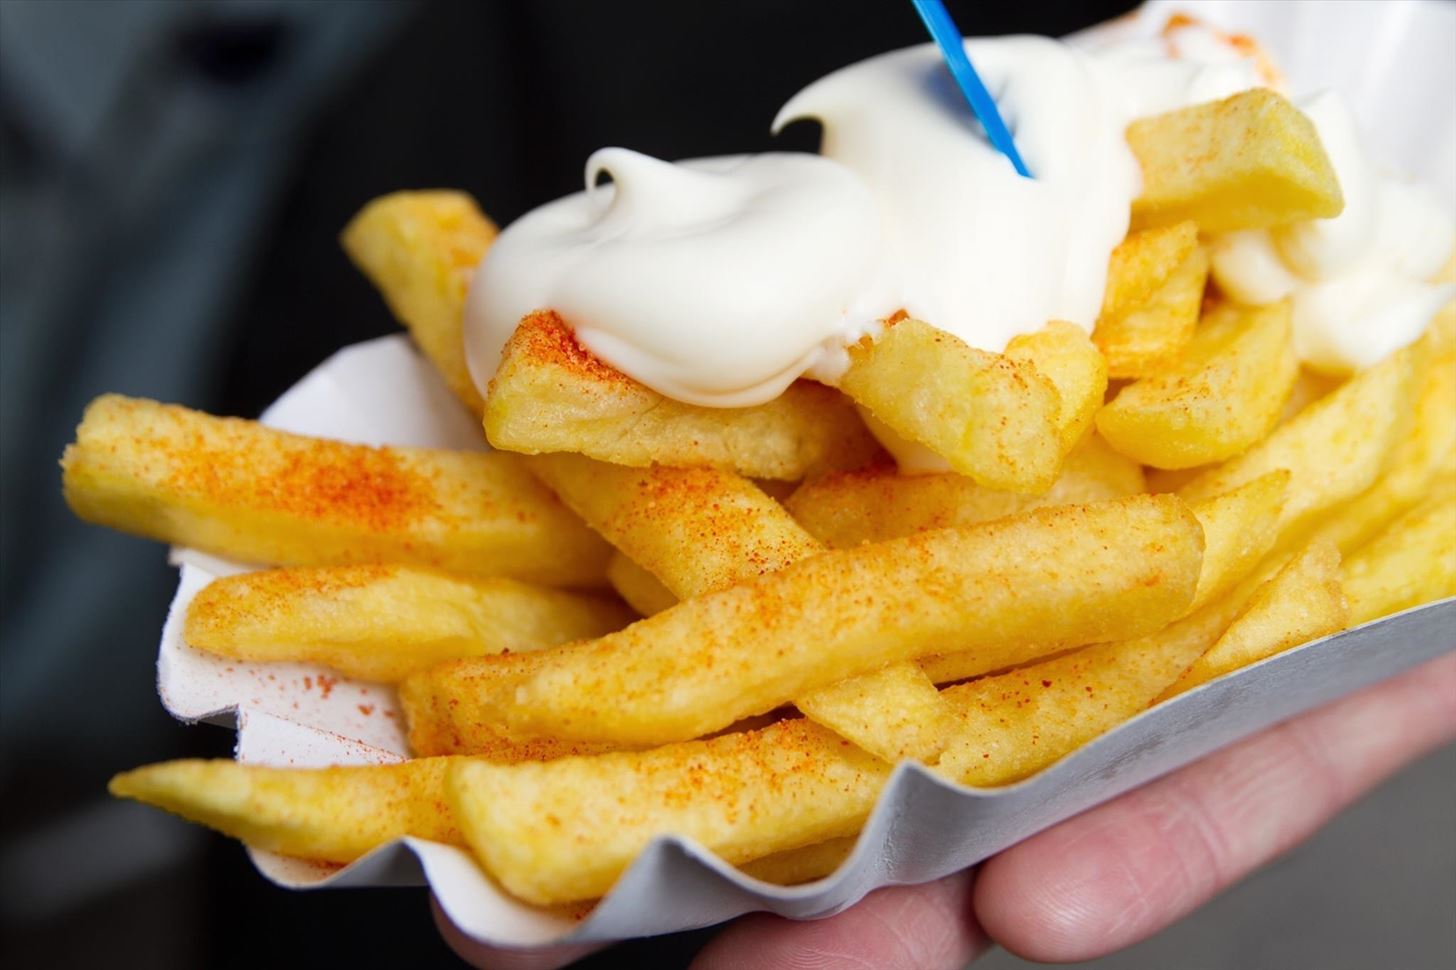 How Many of These Foods Would You Eat With Mayonnaise? French Fries With Mayonnaise